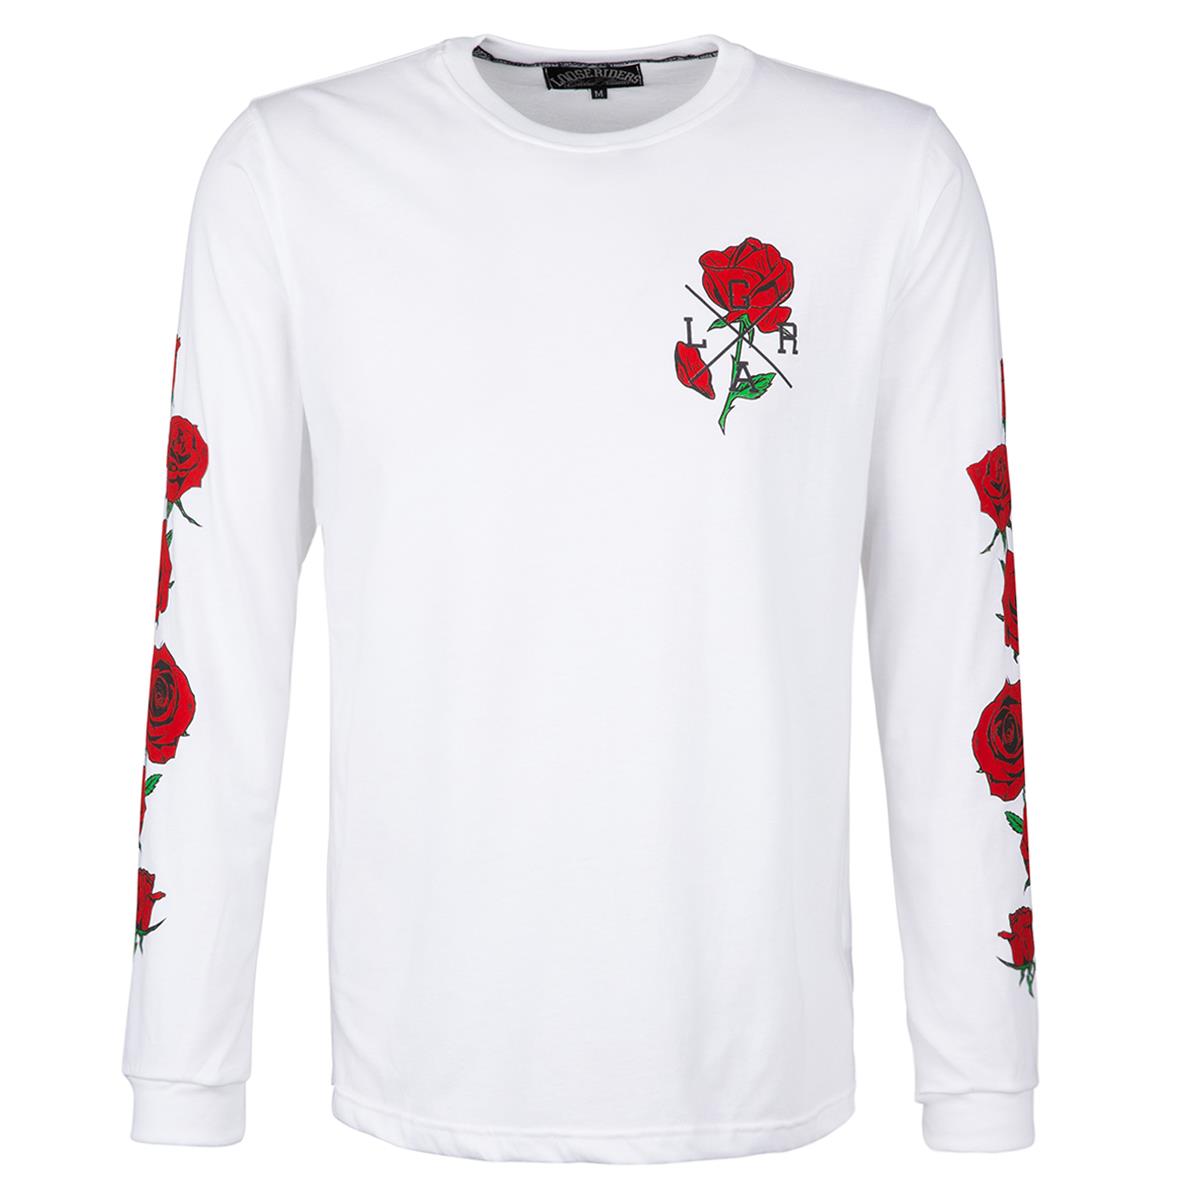 Loose Riders Pull Roses White/Red